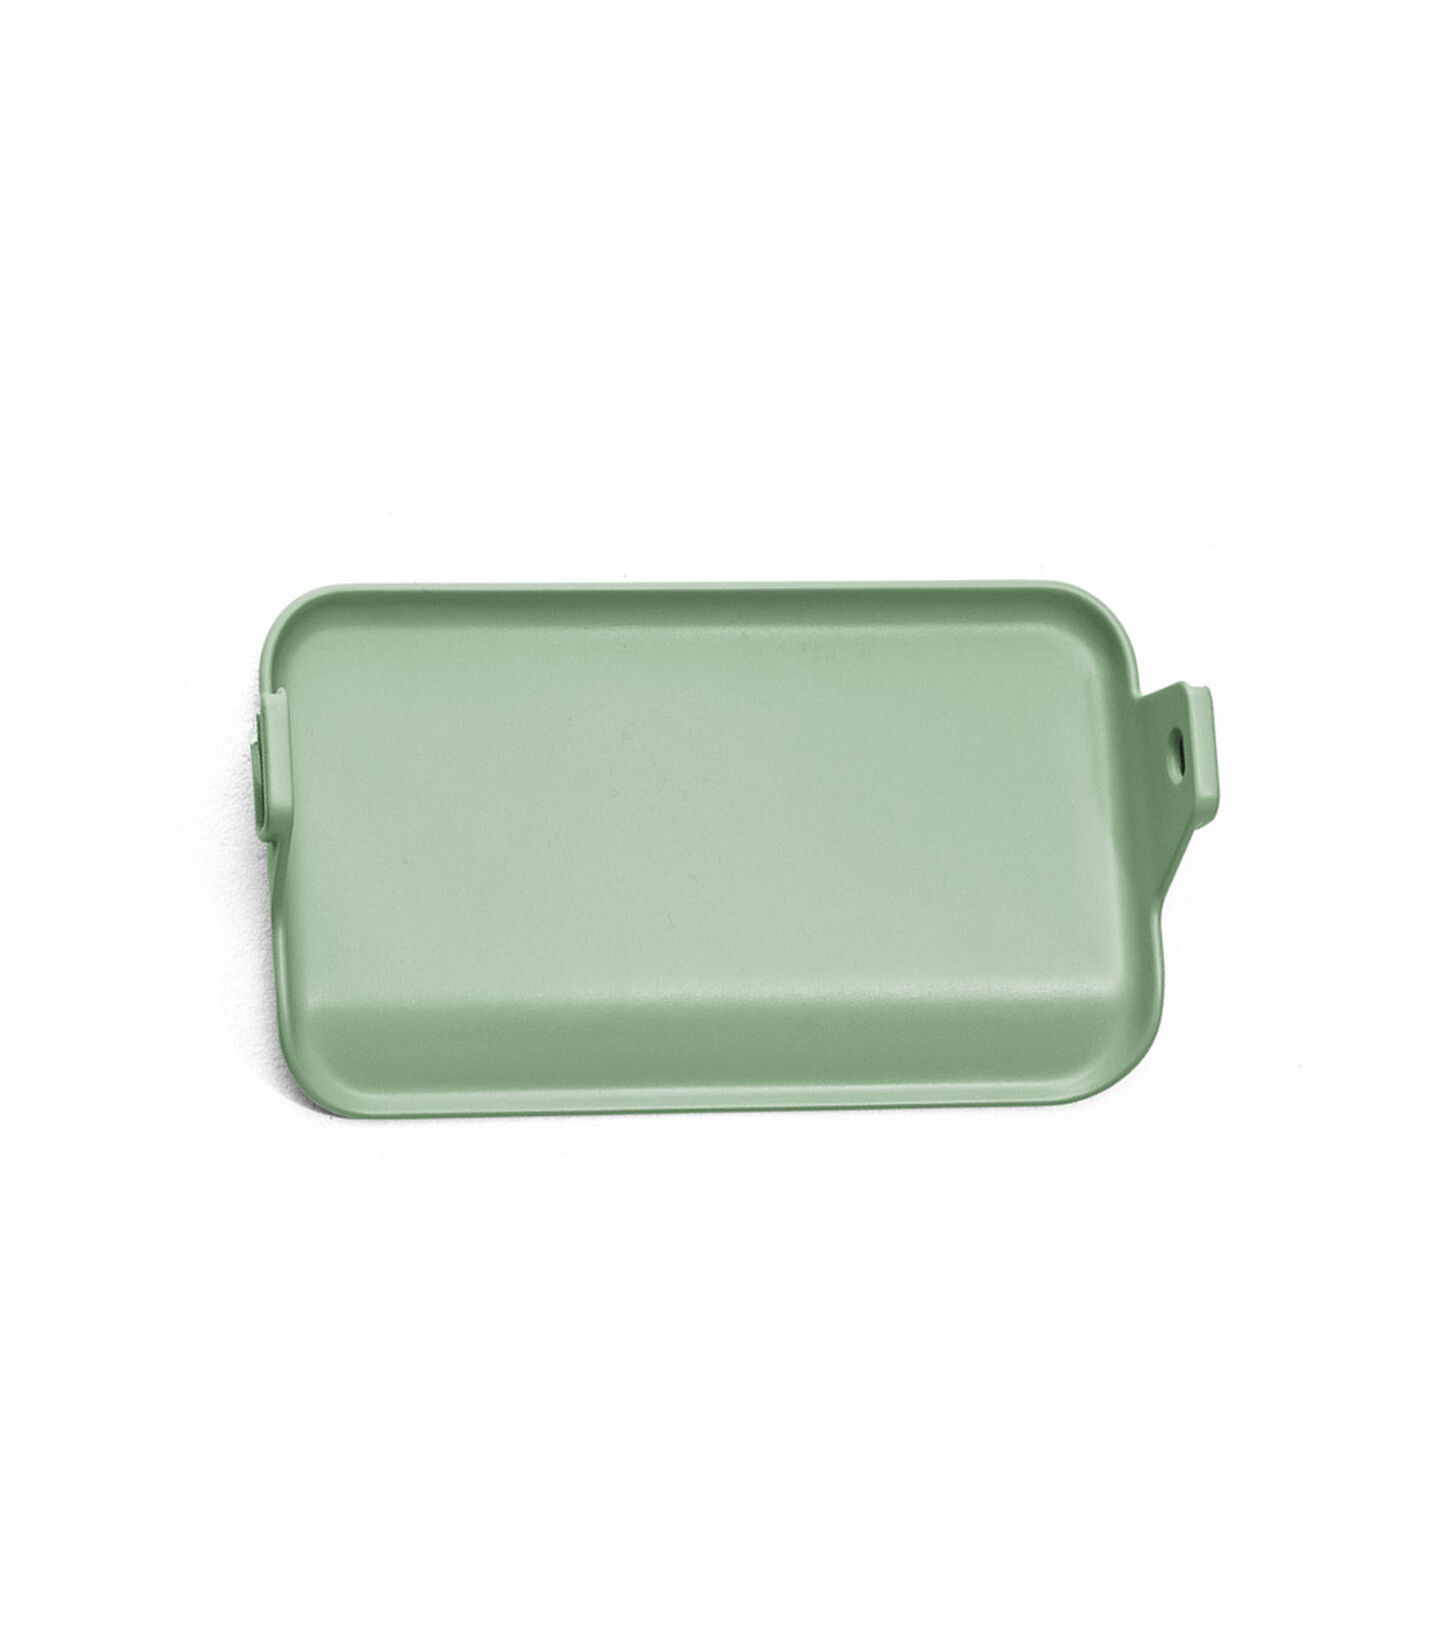 Stokke® Clikk™ Foot Plate in Clover Green. Available as Spare part. view 1